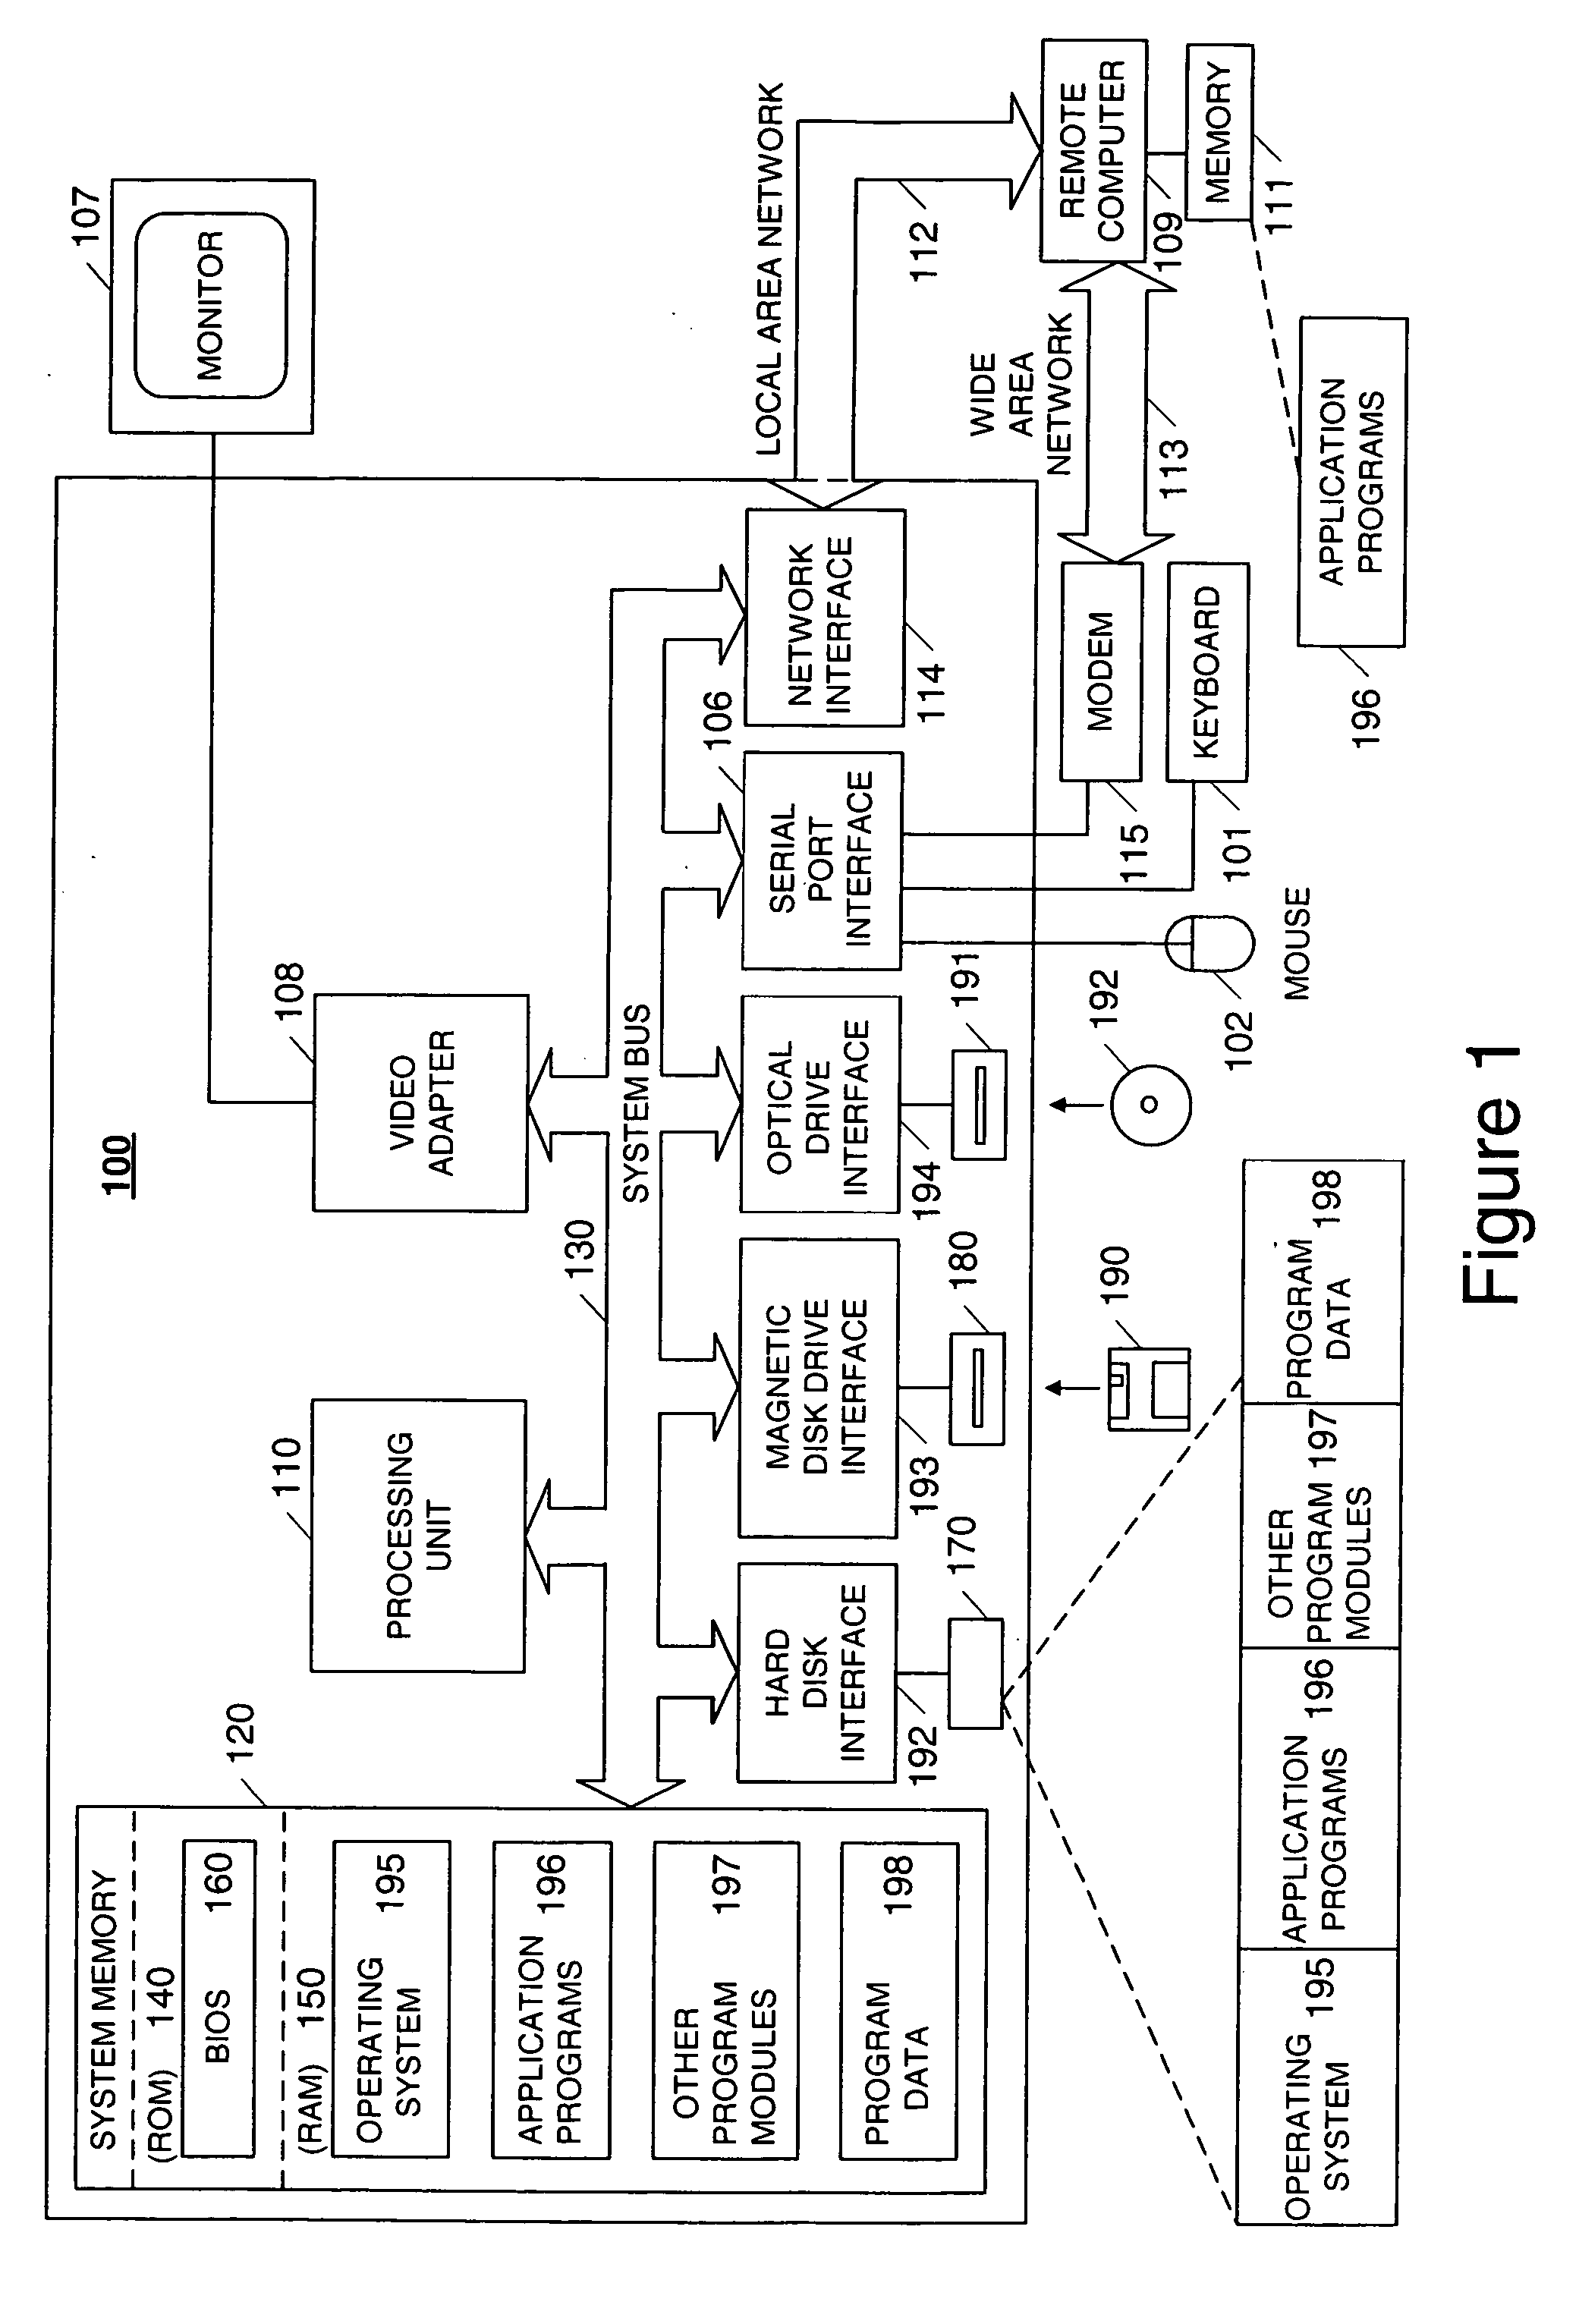 Method and apparatus for prioritizing software tests